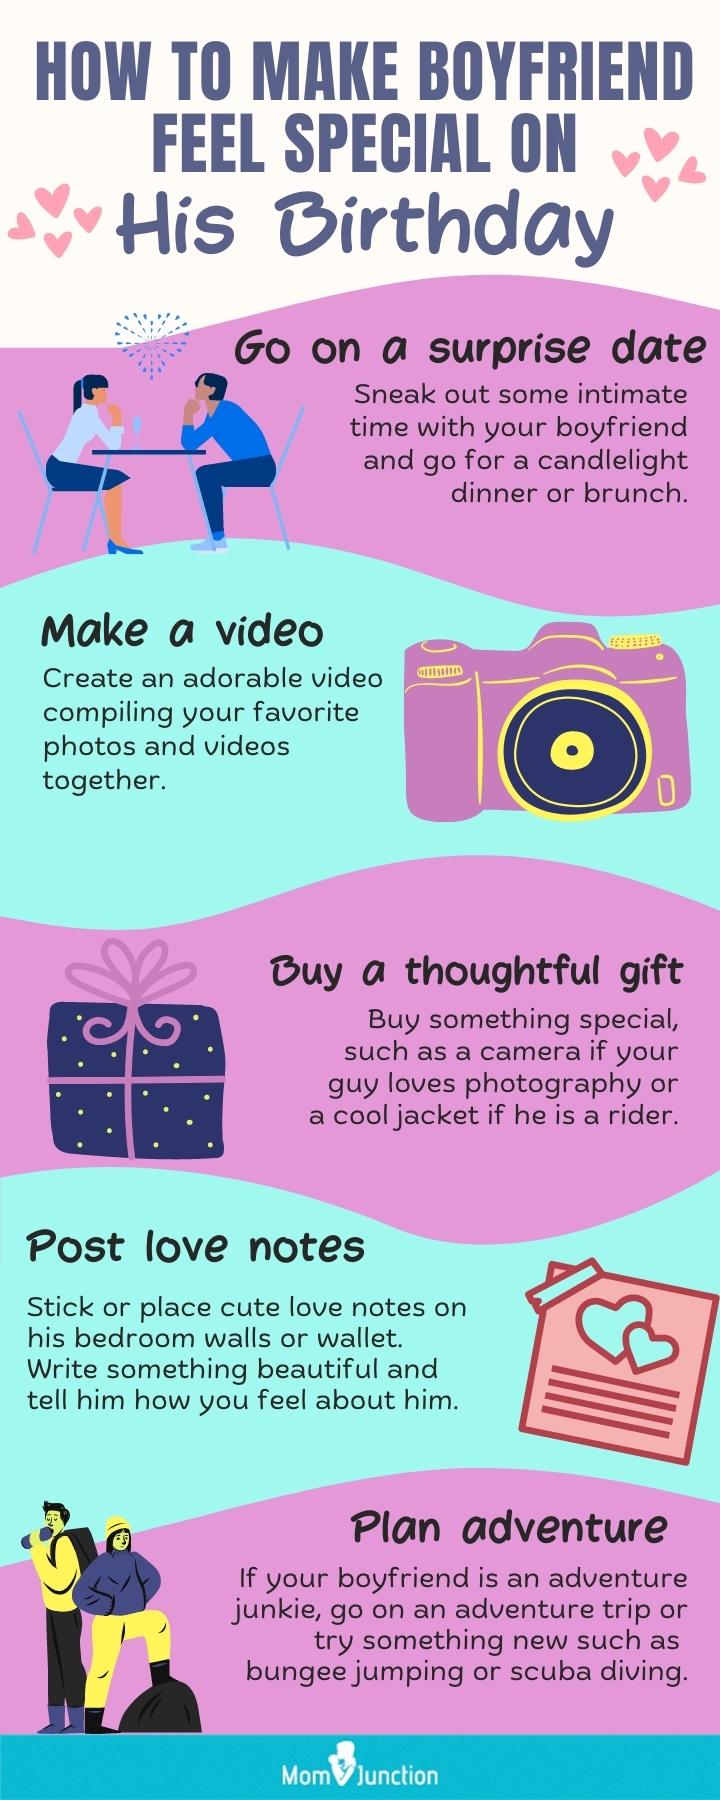 how to make boyfriend feel special on his birthday [infographic]